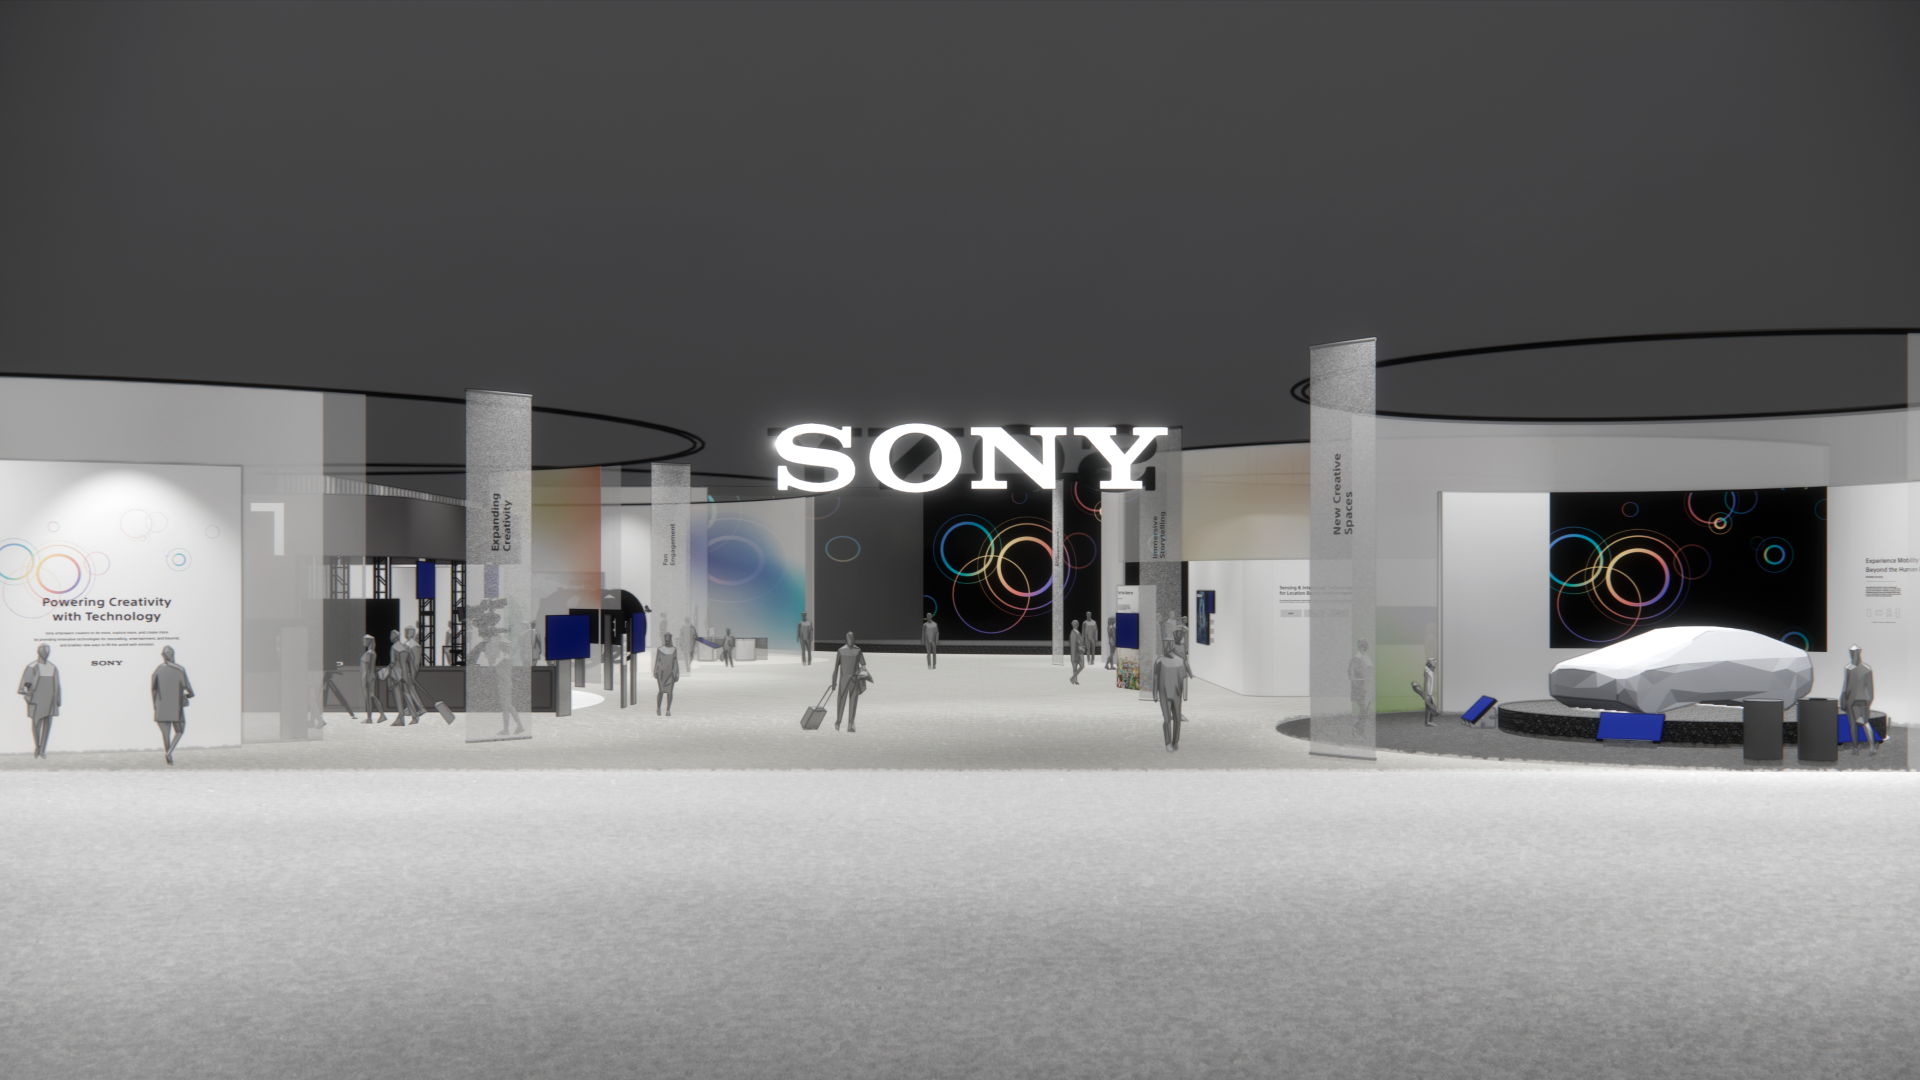 Sonys stand